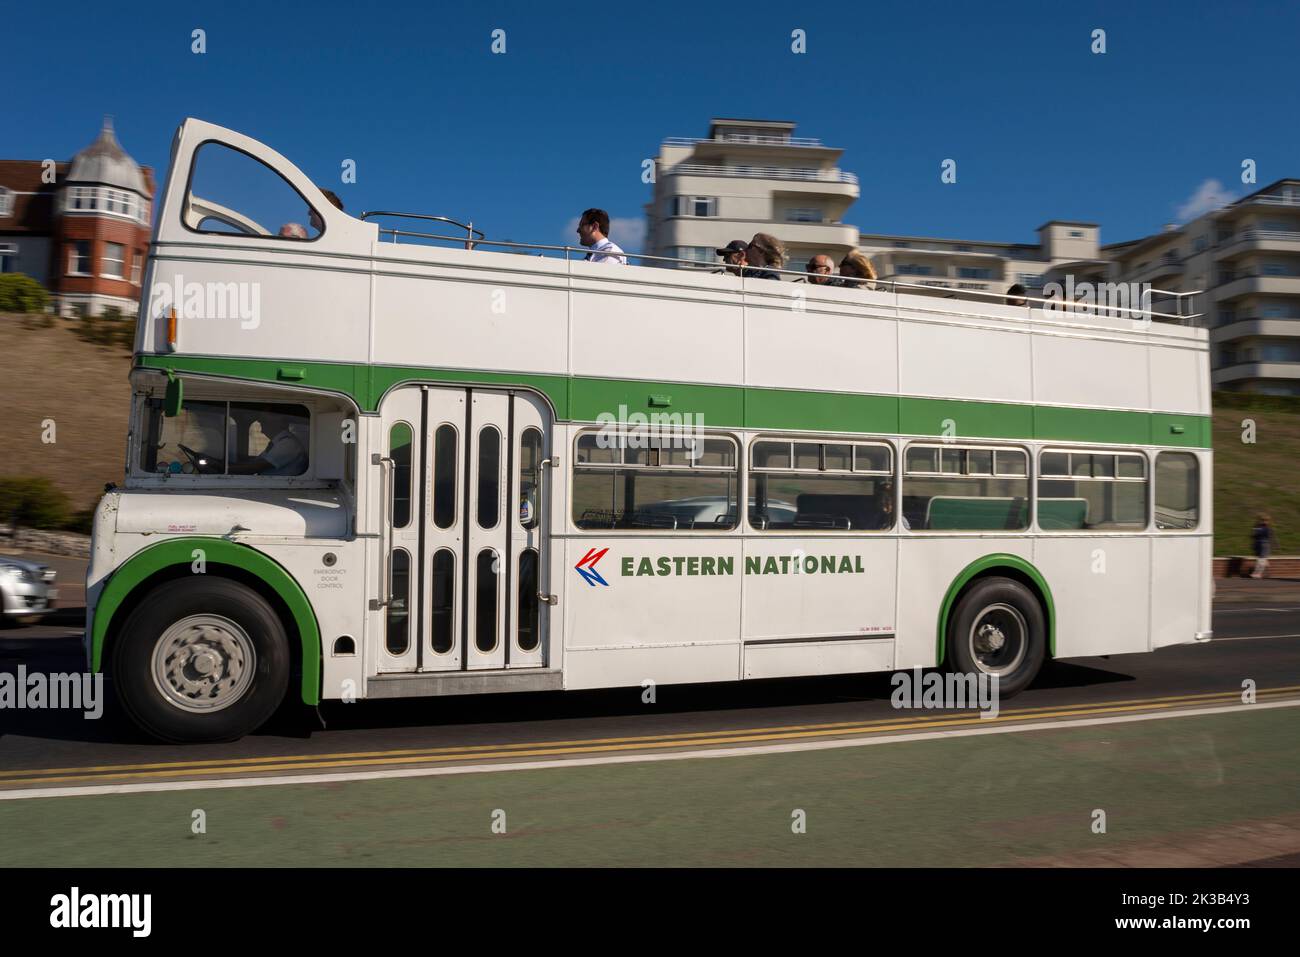 Vintage 1963 Bristol Lodekka FLF6G open top bus in Eastern National scheme operating the EnsignBus Route 68 seafront service in Southend on Sea, Essex Stock Photo